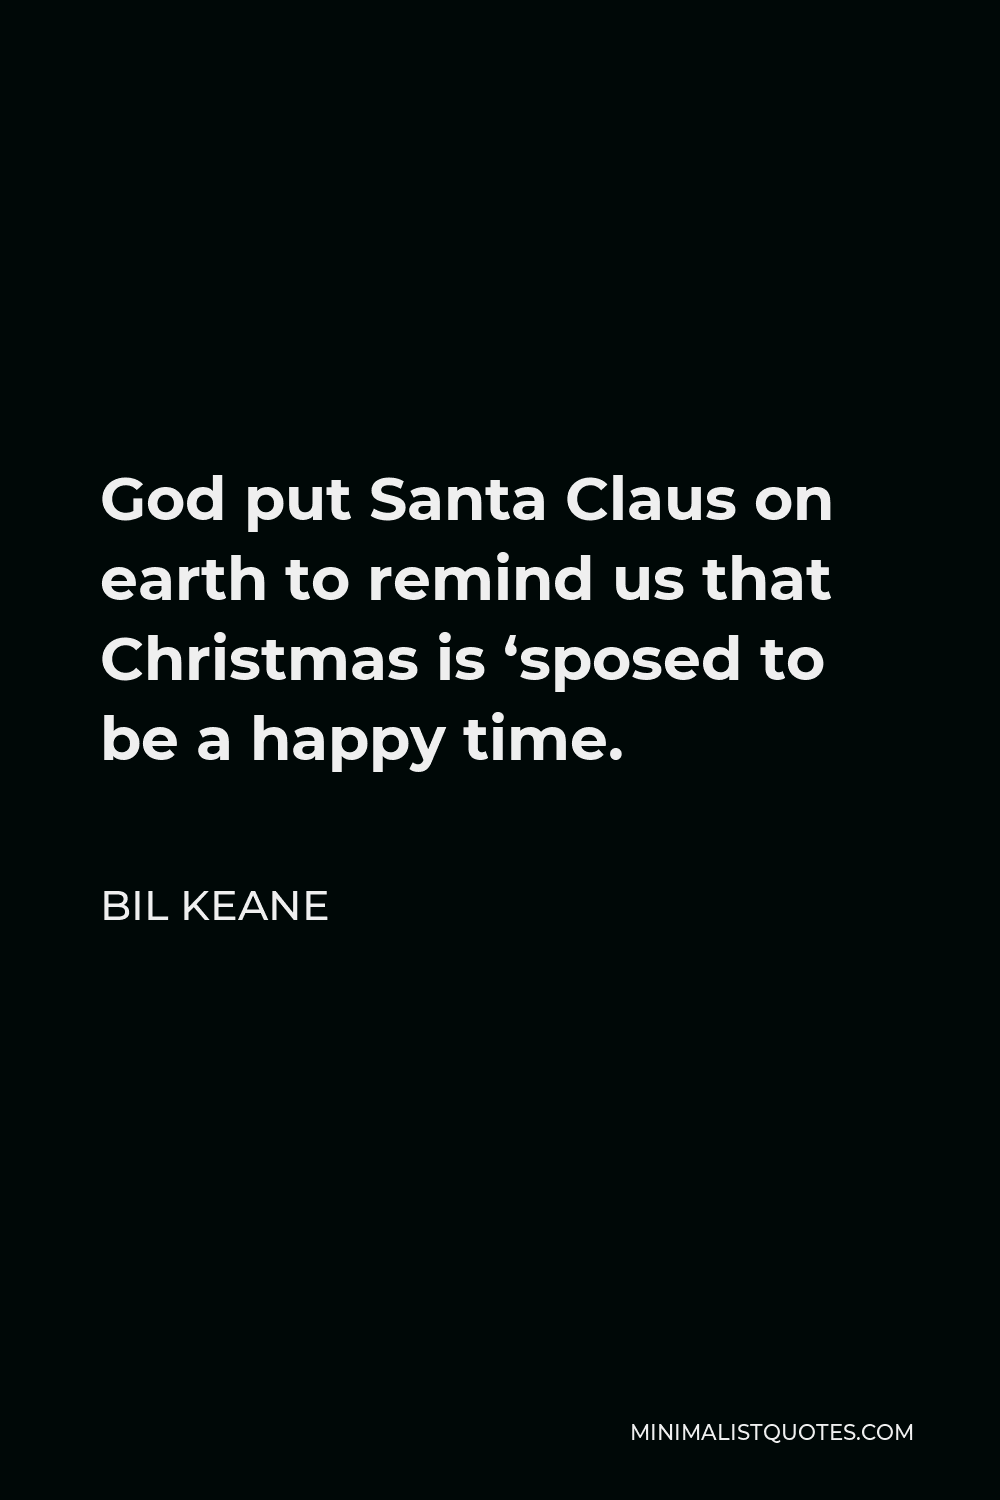 Bil Keane Quote - God put Santa Claus on earth to remind us that Christmas is ‘sposed to be a happy time.